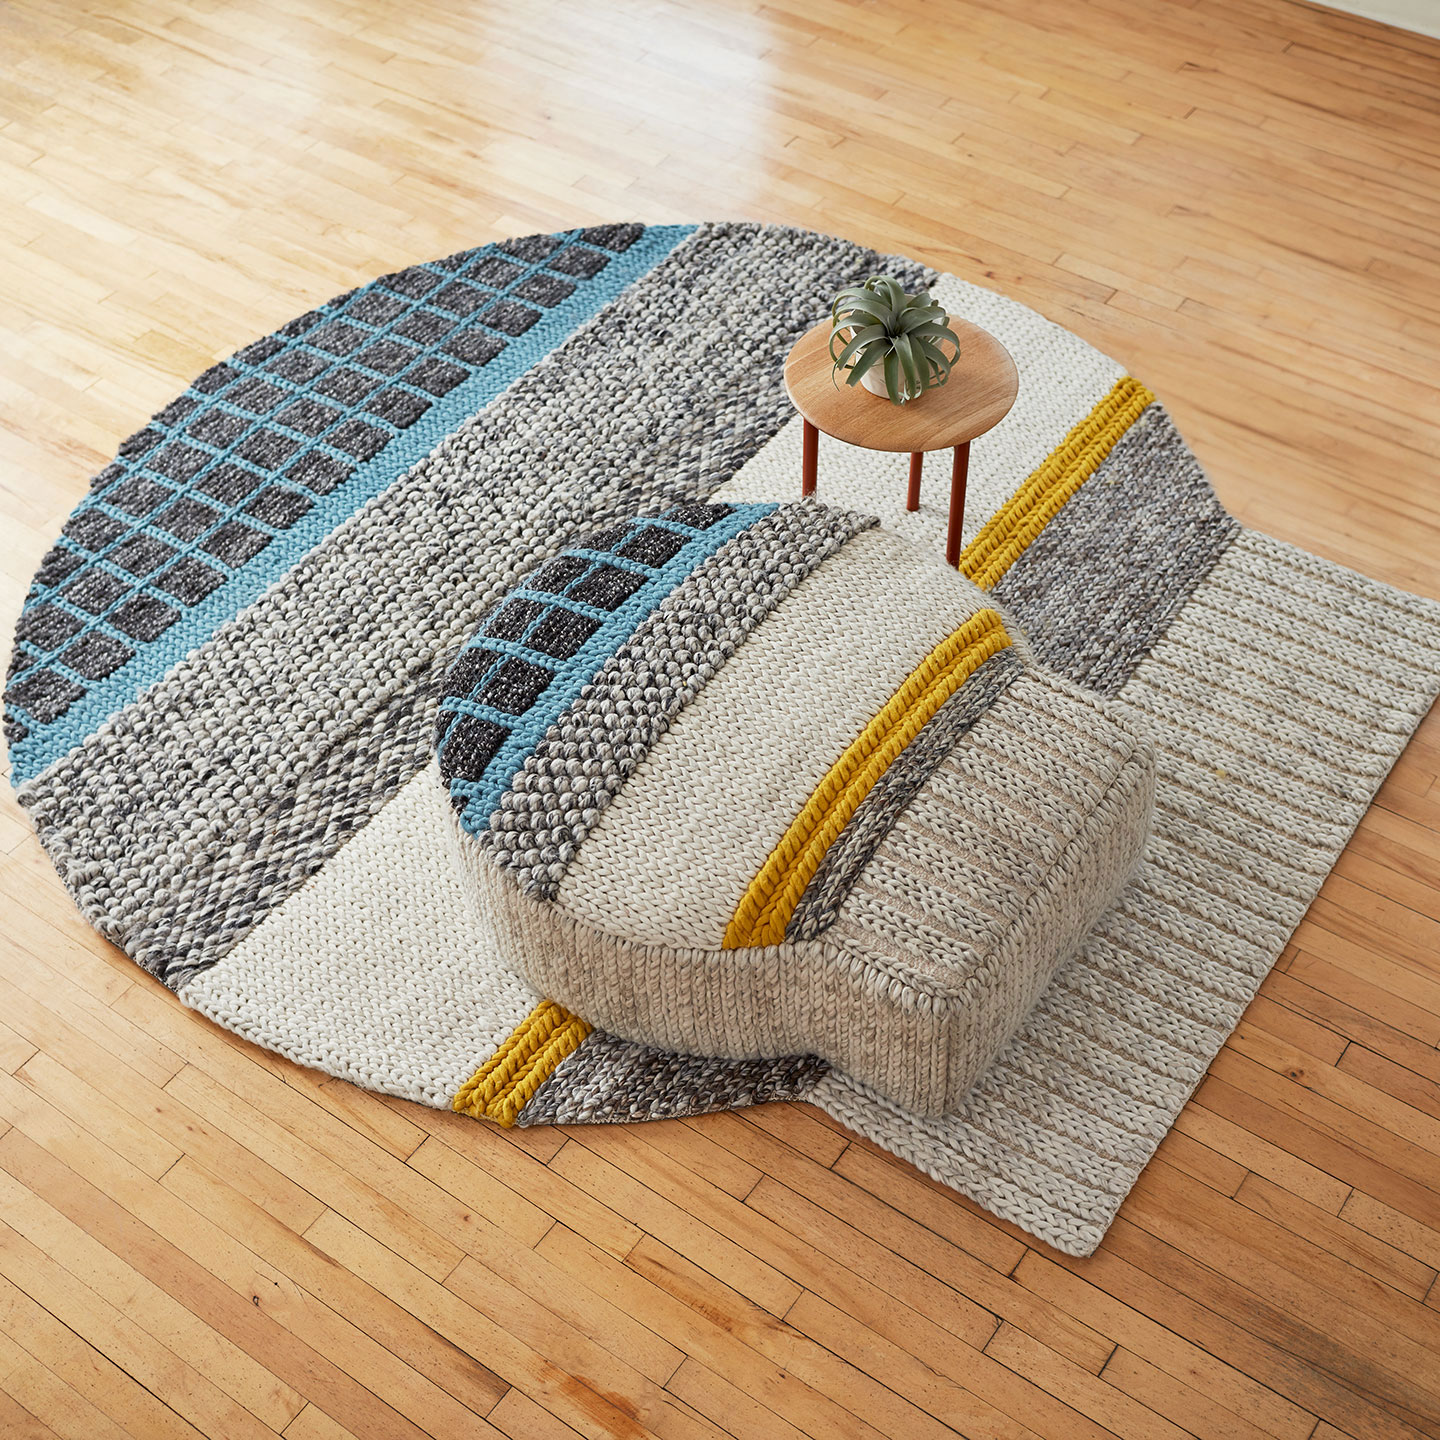 Haworth Mangas Original Rug in multiple colors and wool material and circular shape under ottoman in same shape and color with table on the rug also